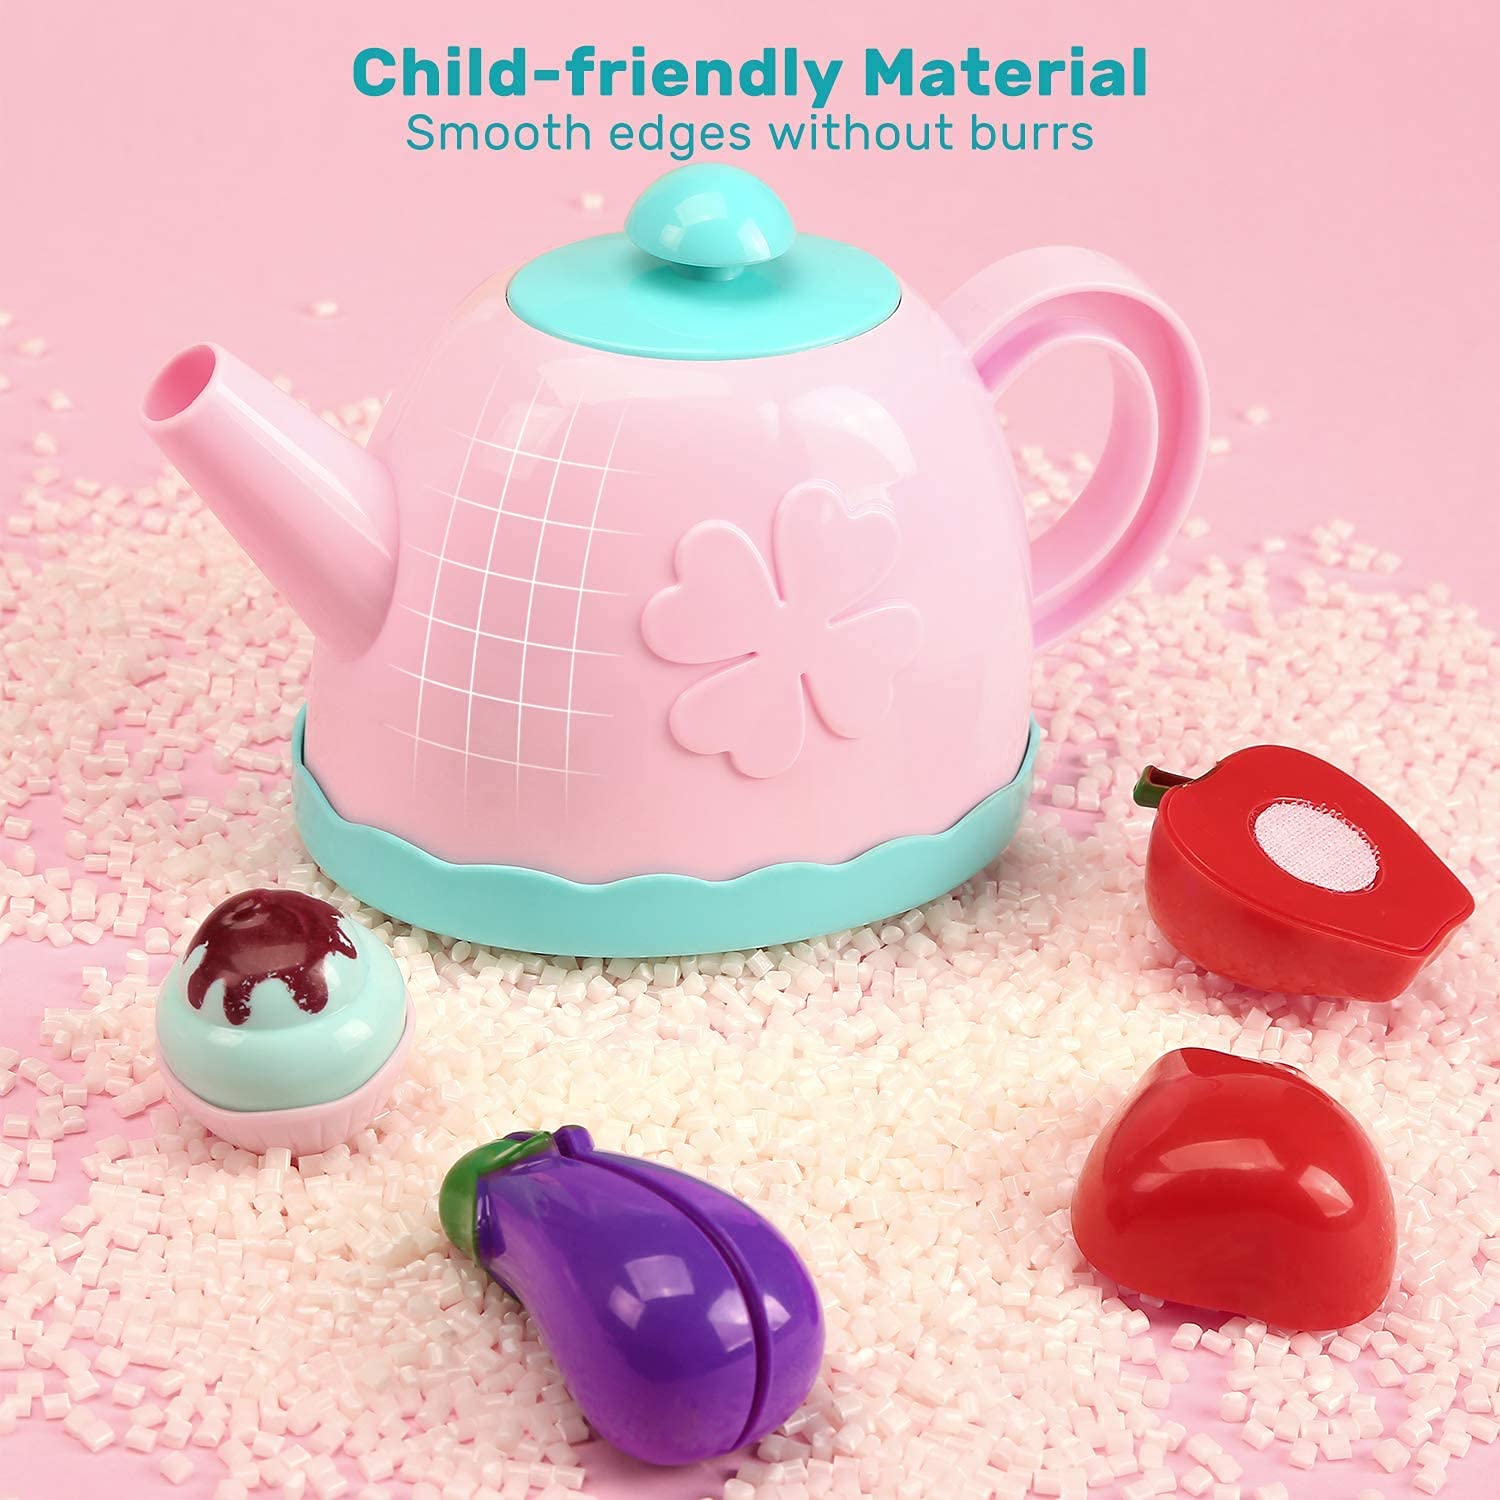 CUTE STONE Kids Toy Tea Party Set Kettle with Light Music, Teapot, Dessert,  Cookies, Play Tea Accessories & Carrying Case